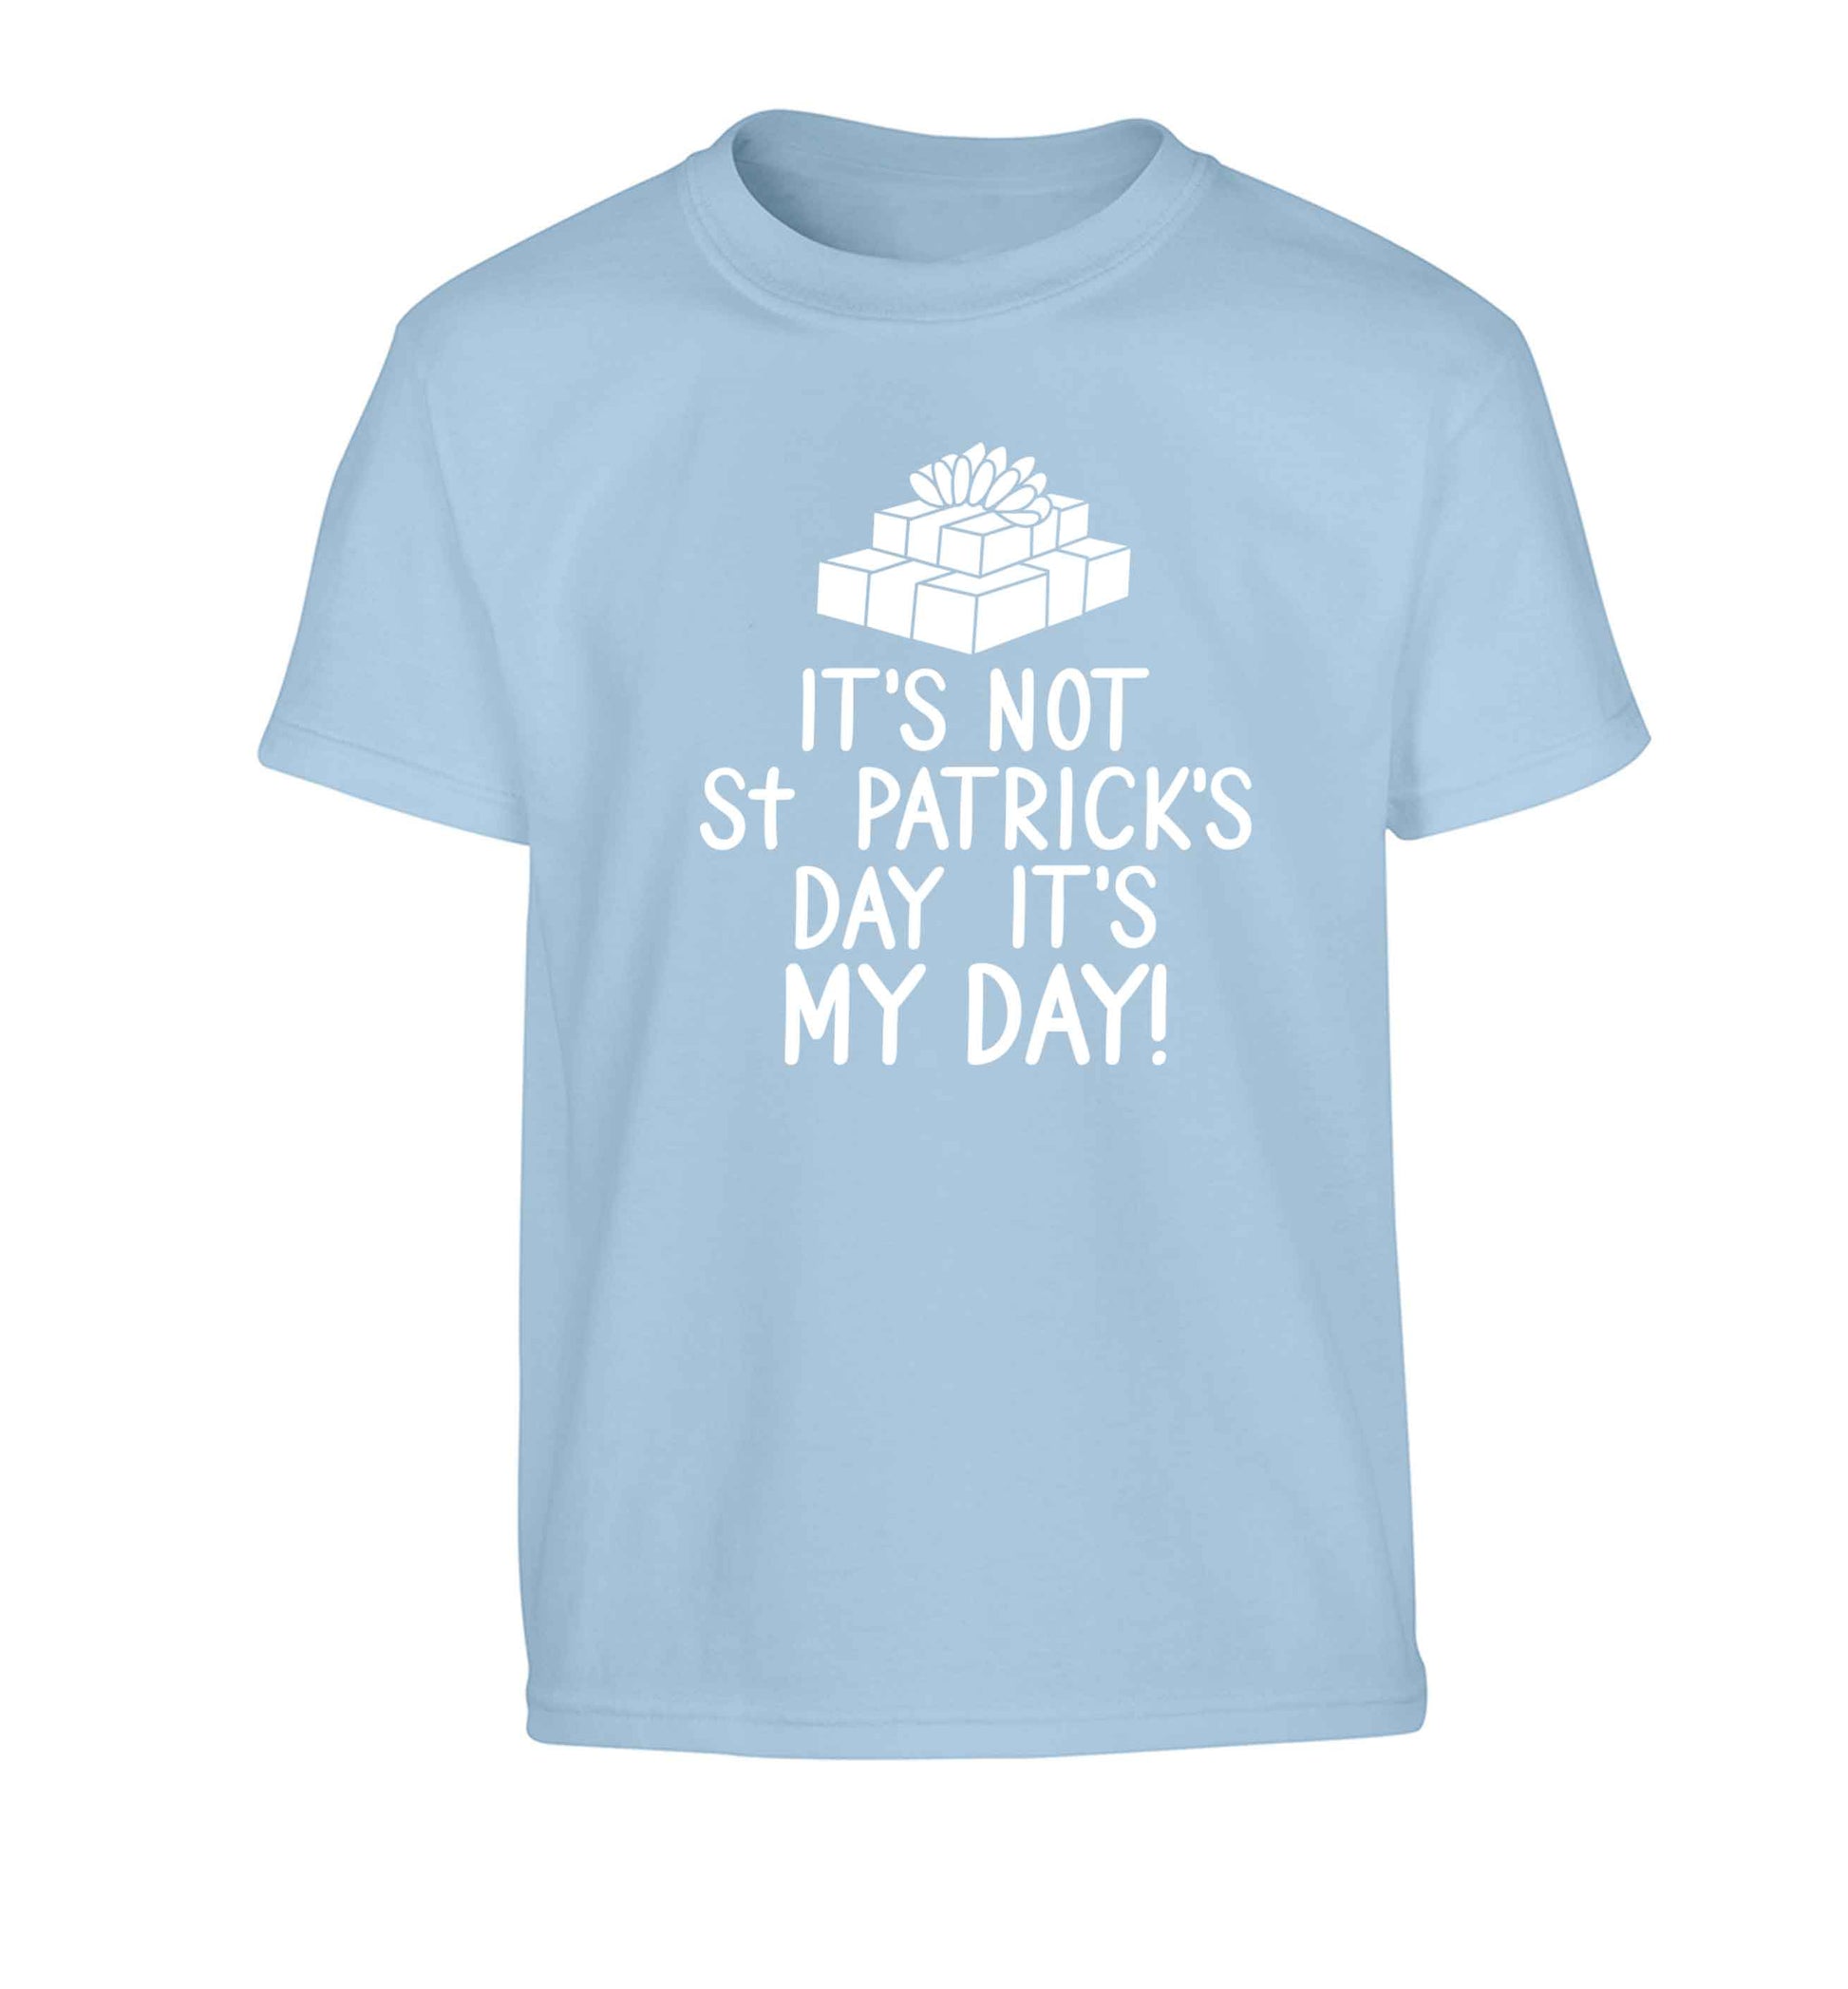 Funny gifts for your mum on mother's dayor her birthday! It's not St Patricks day it's my day Children's light blue Tshirt 12-13 Years